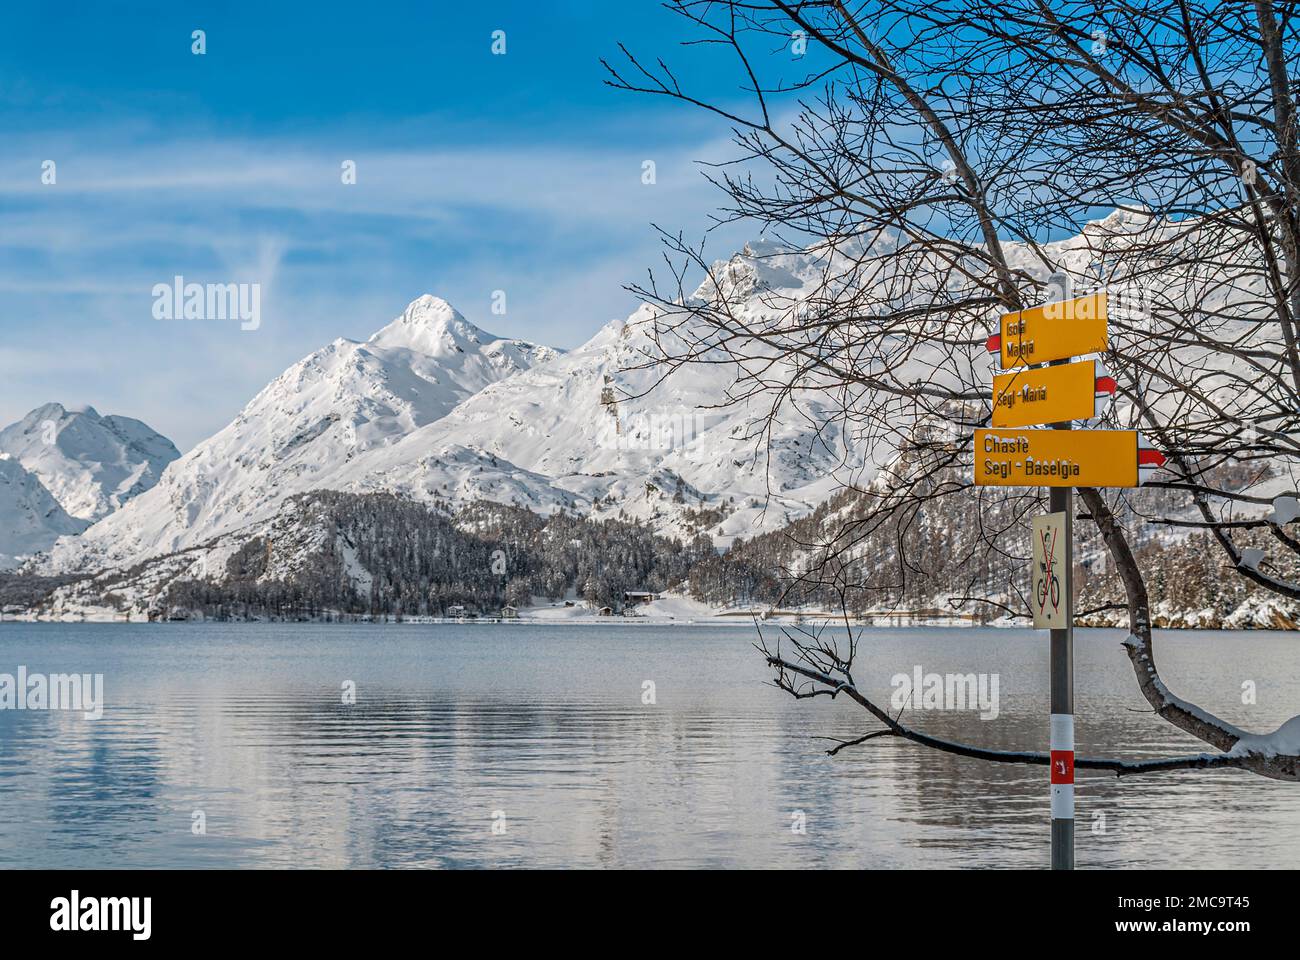 Hiking signpost in a winter landscape at Lake Sils, Engadine, Switzerland Stock Photo